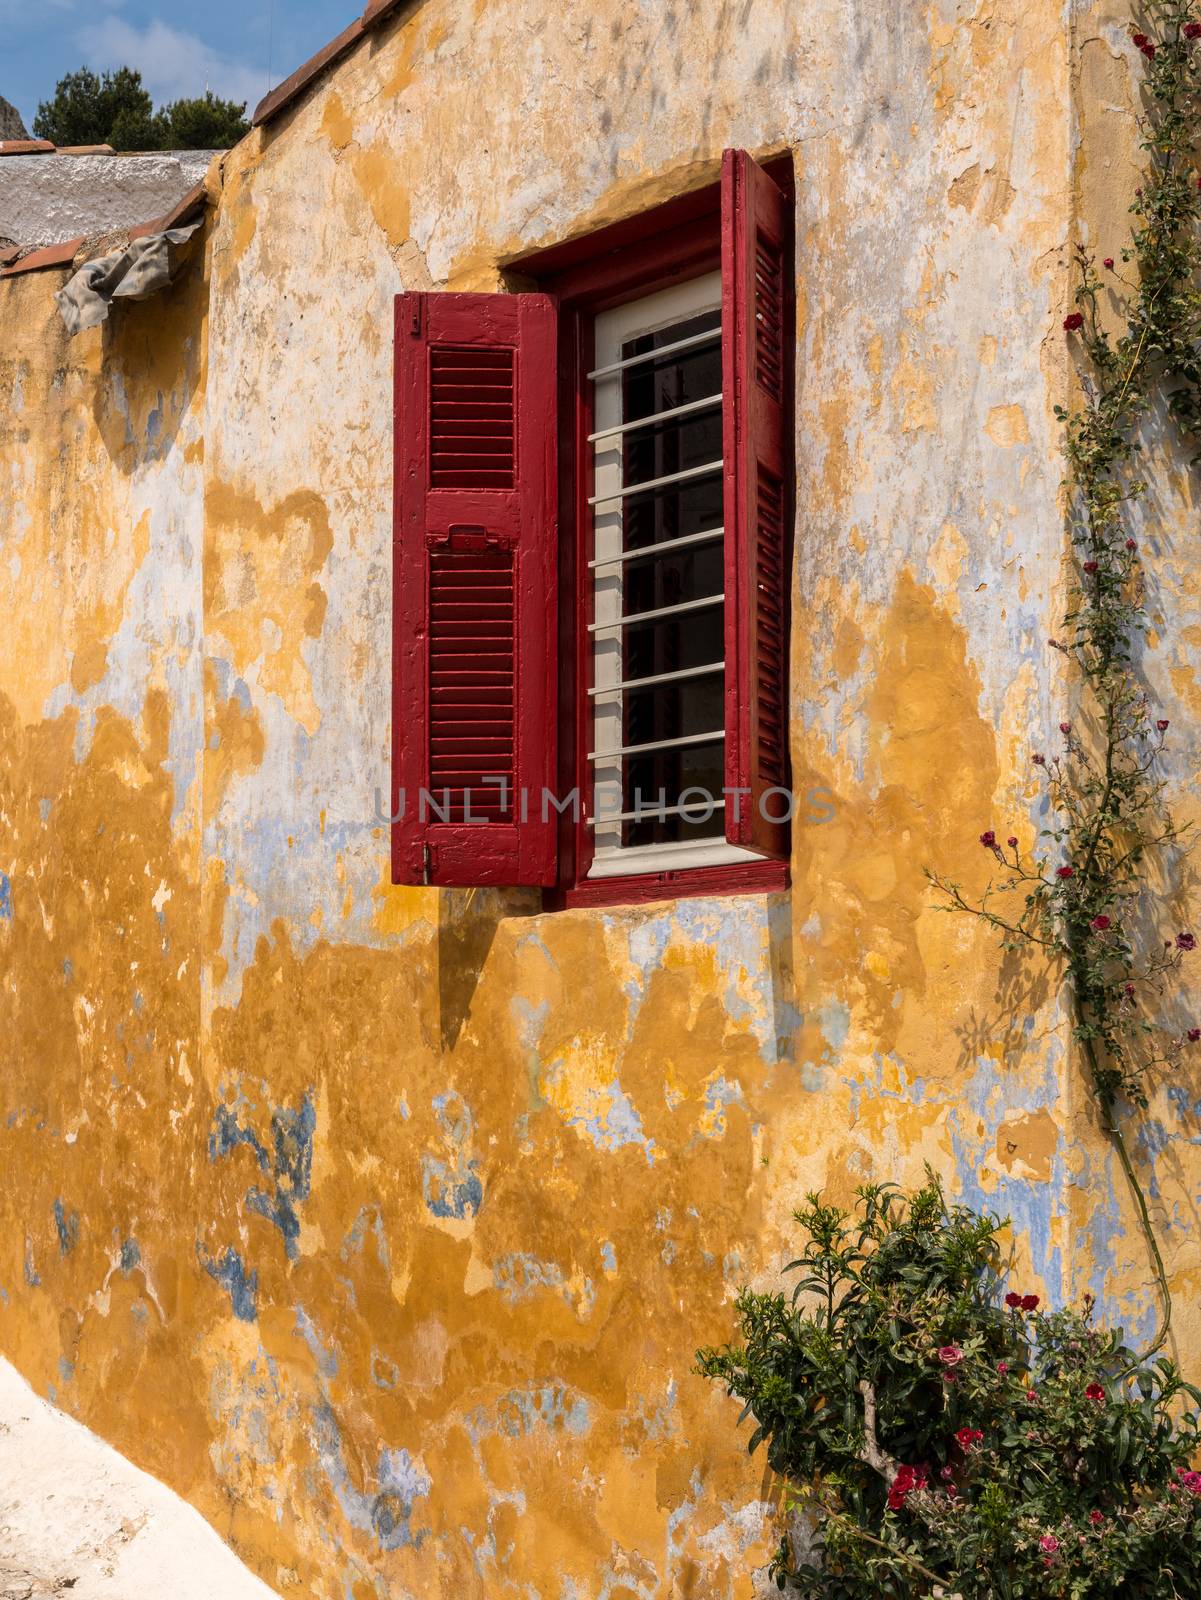 Small window in ancient neighborhood of Anafiotika in Athens by the Acropolis